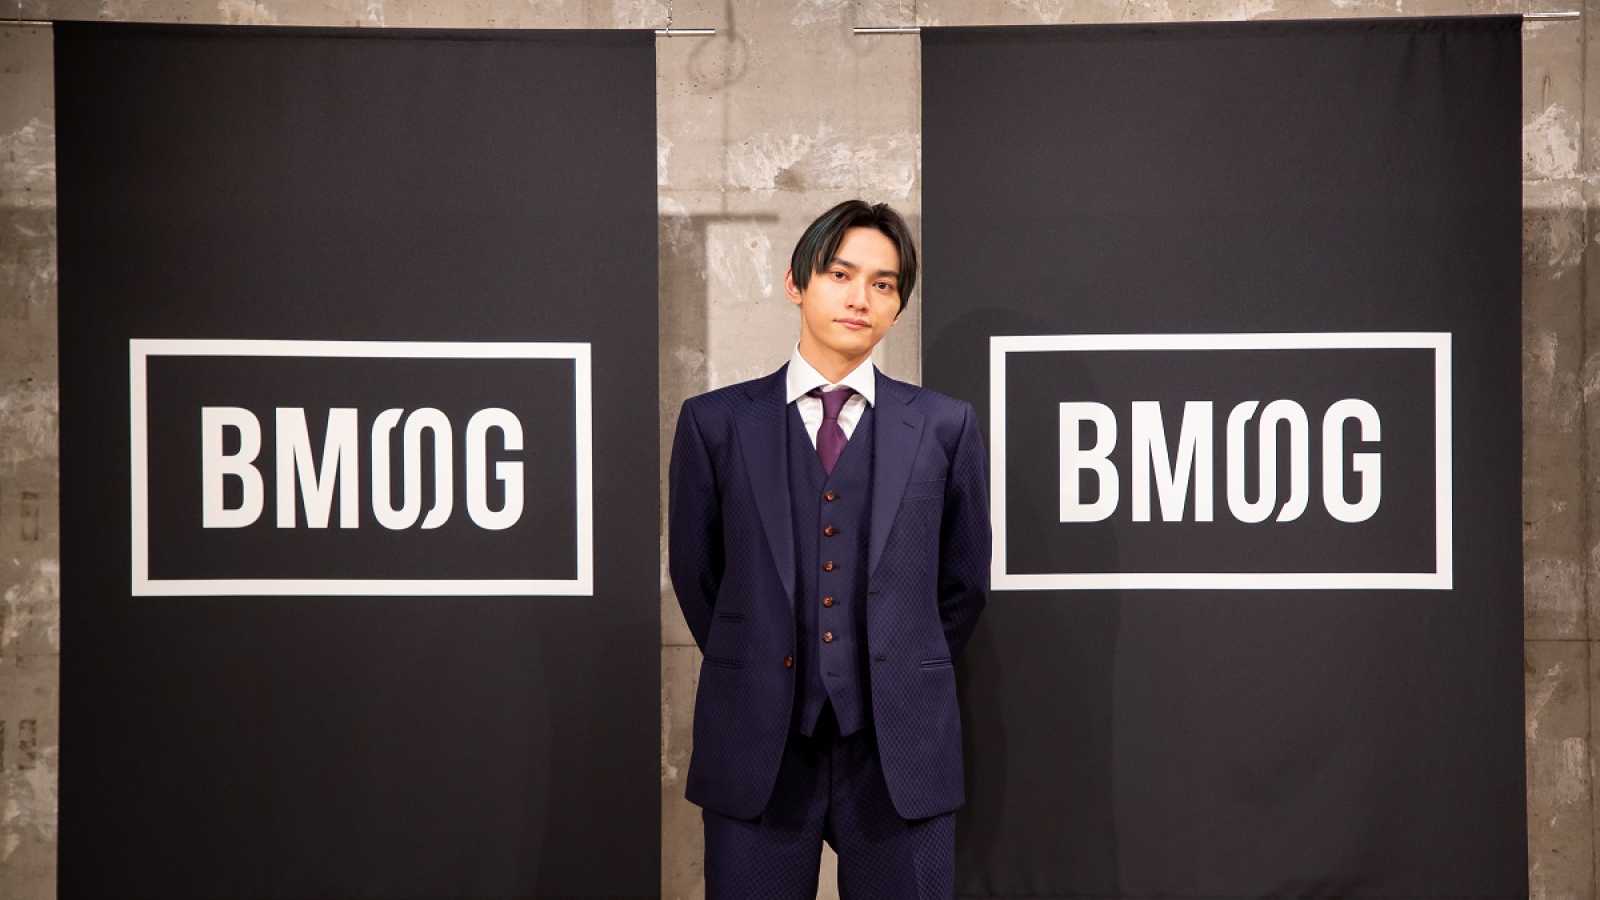 BMSG Announces New Partnership with UNIVERSAL MUSIC and Second Boy Group © BMSG. All rights reserved.